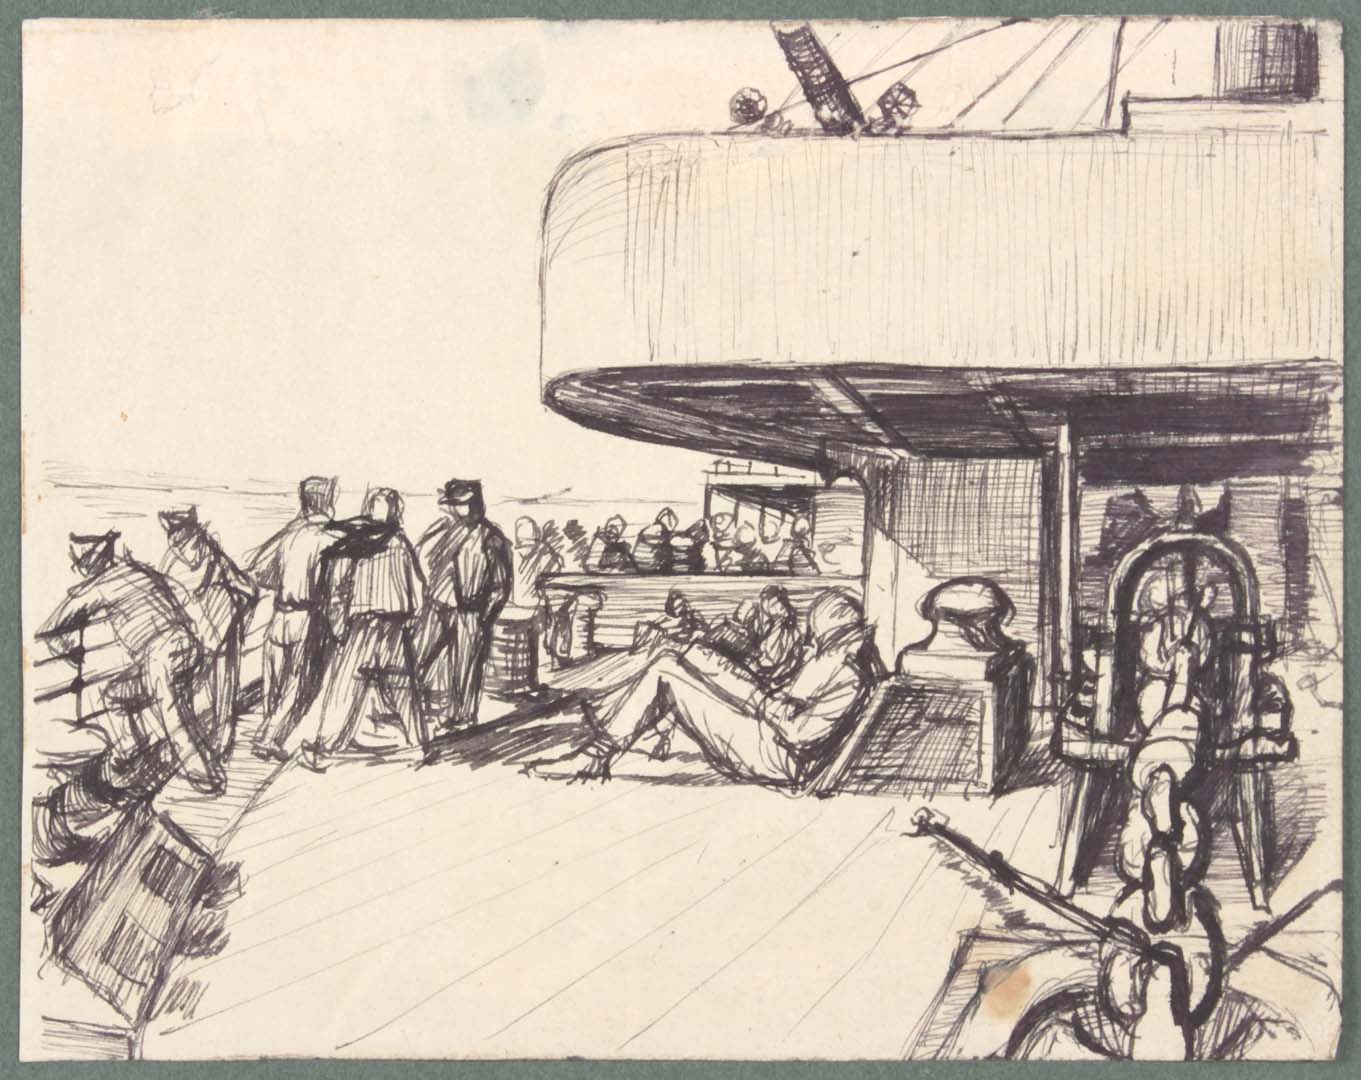 1944 NT (Convoy to Italy) Pen and Ink on Paper 4.8125 x 6.125